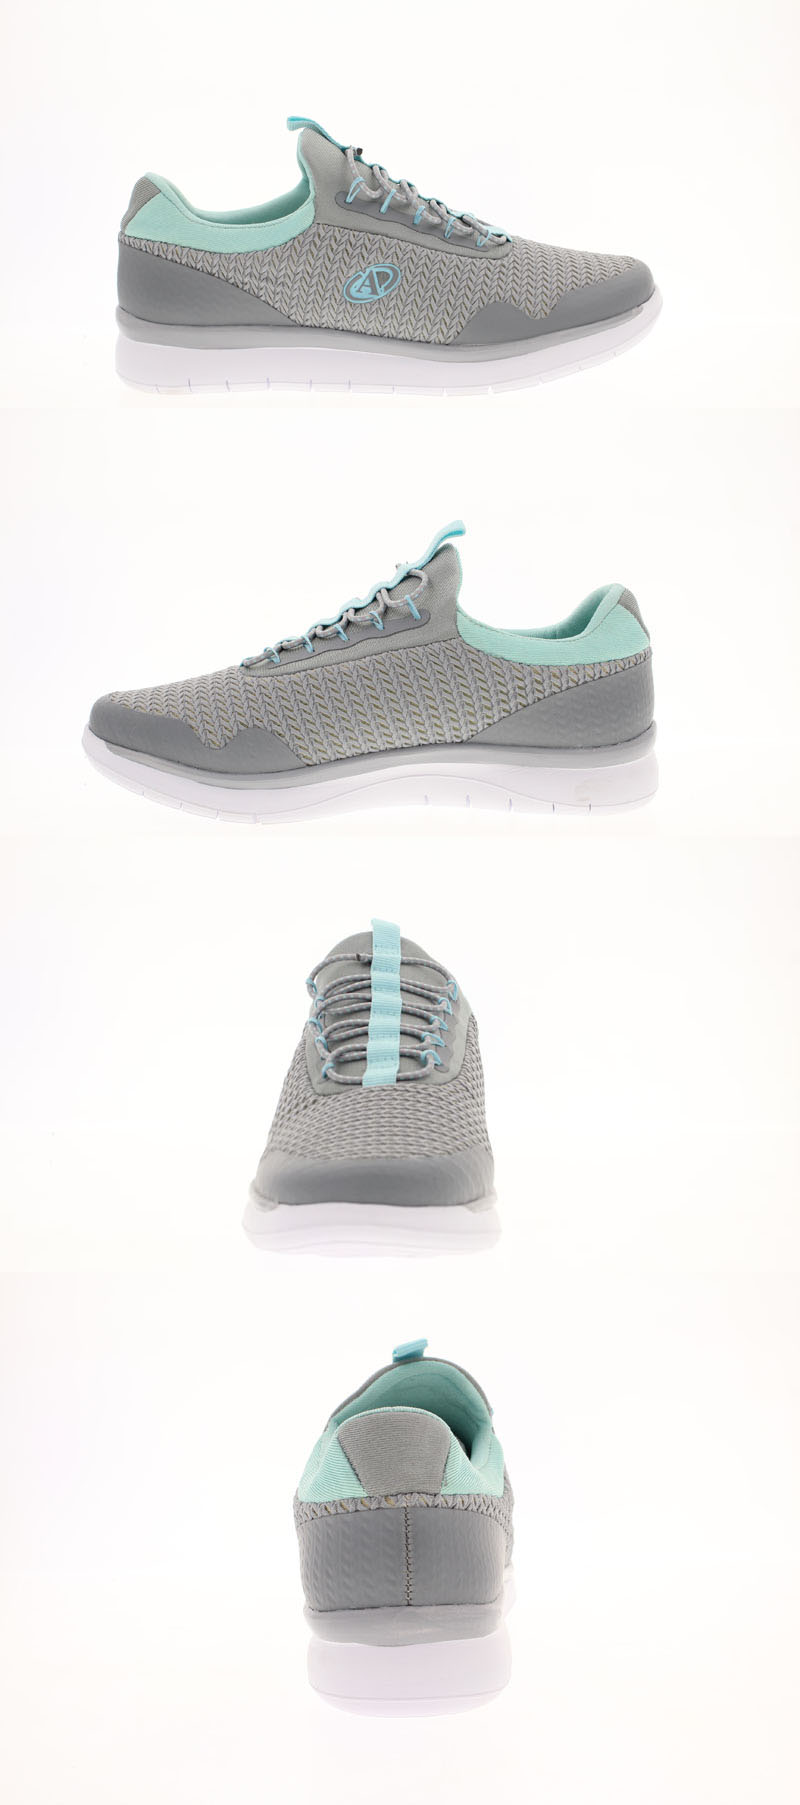 Light grey and green running shoes